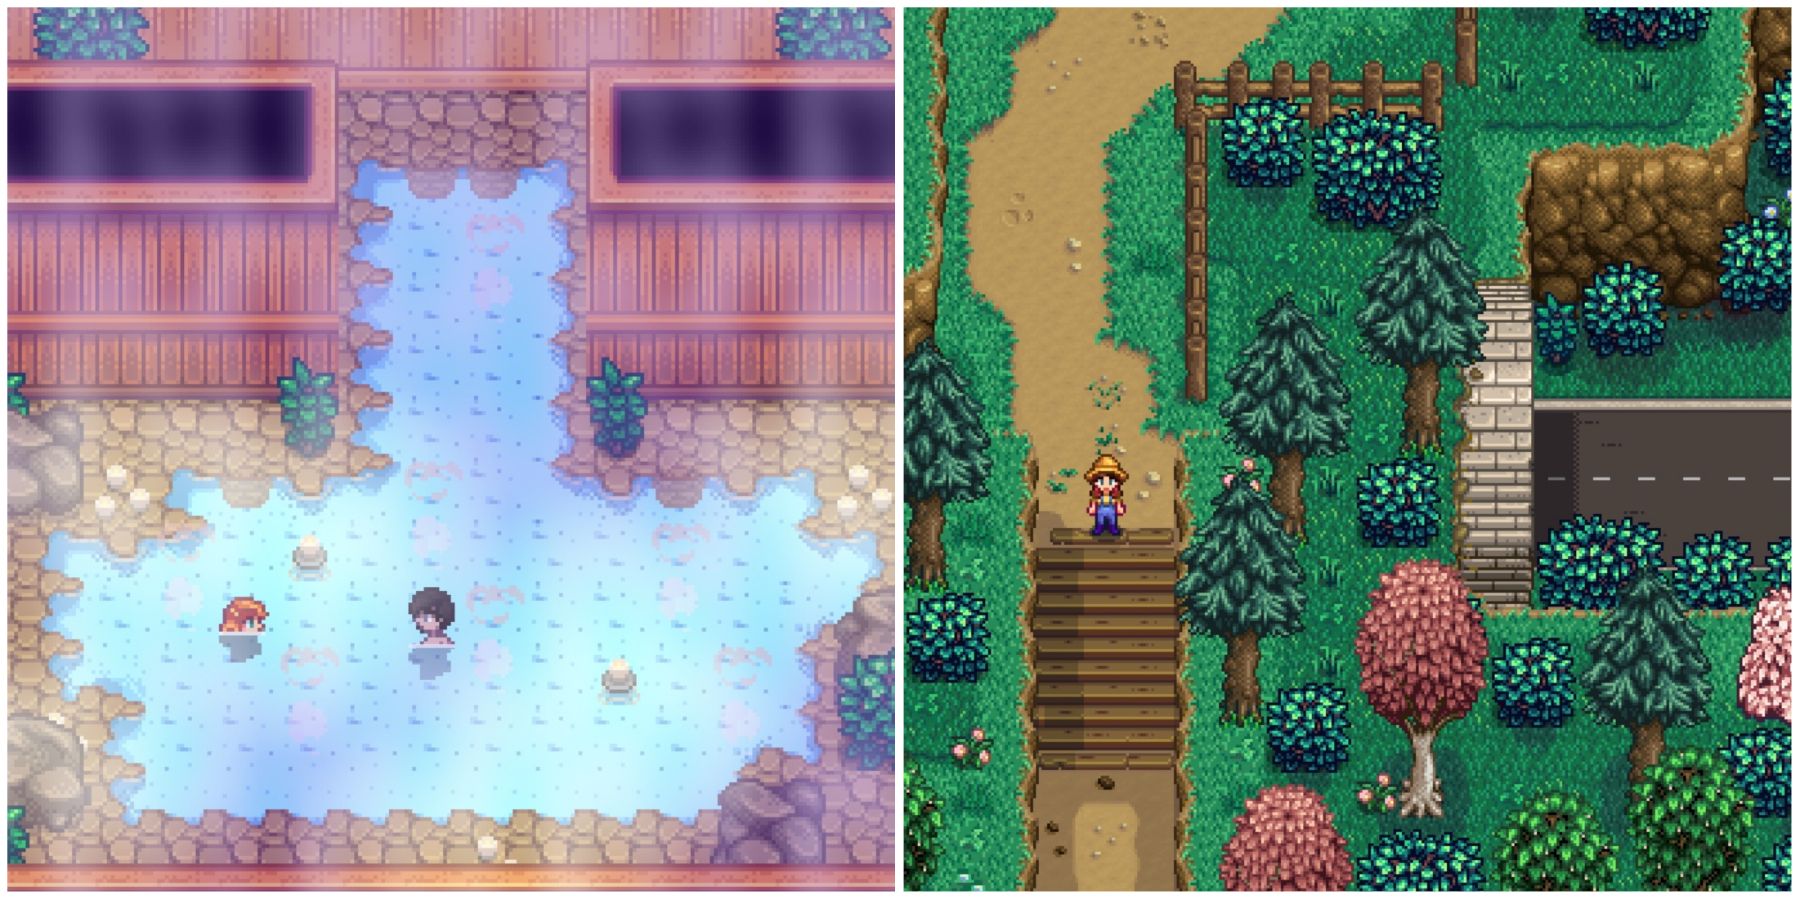 The 10 best Stardew Valley mods you can download now